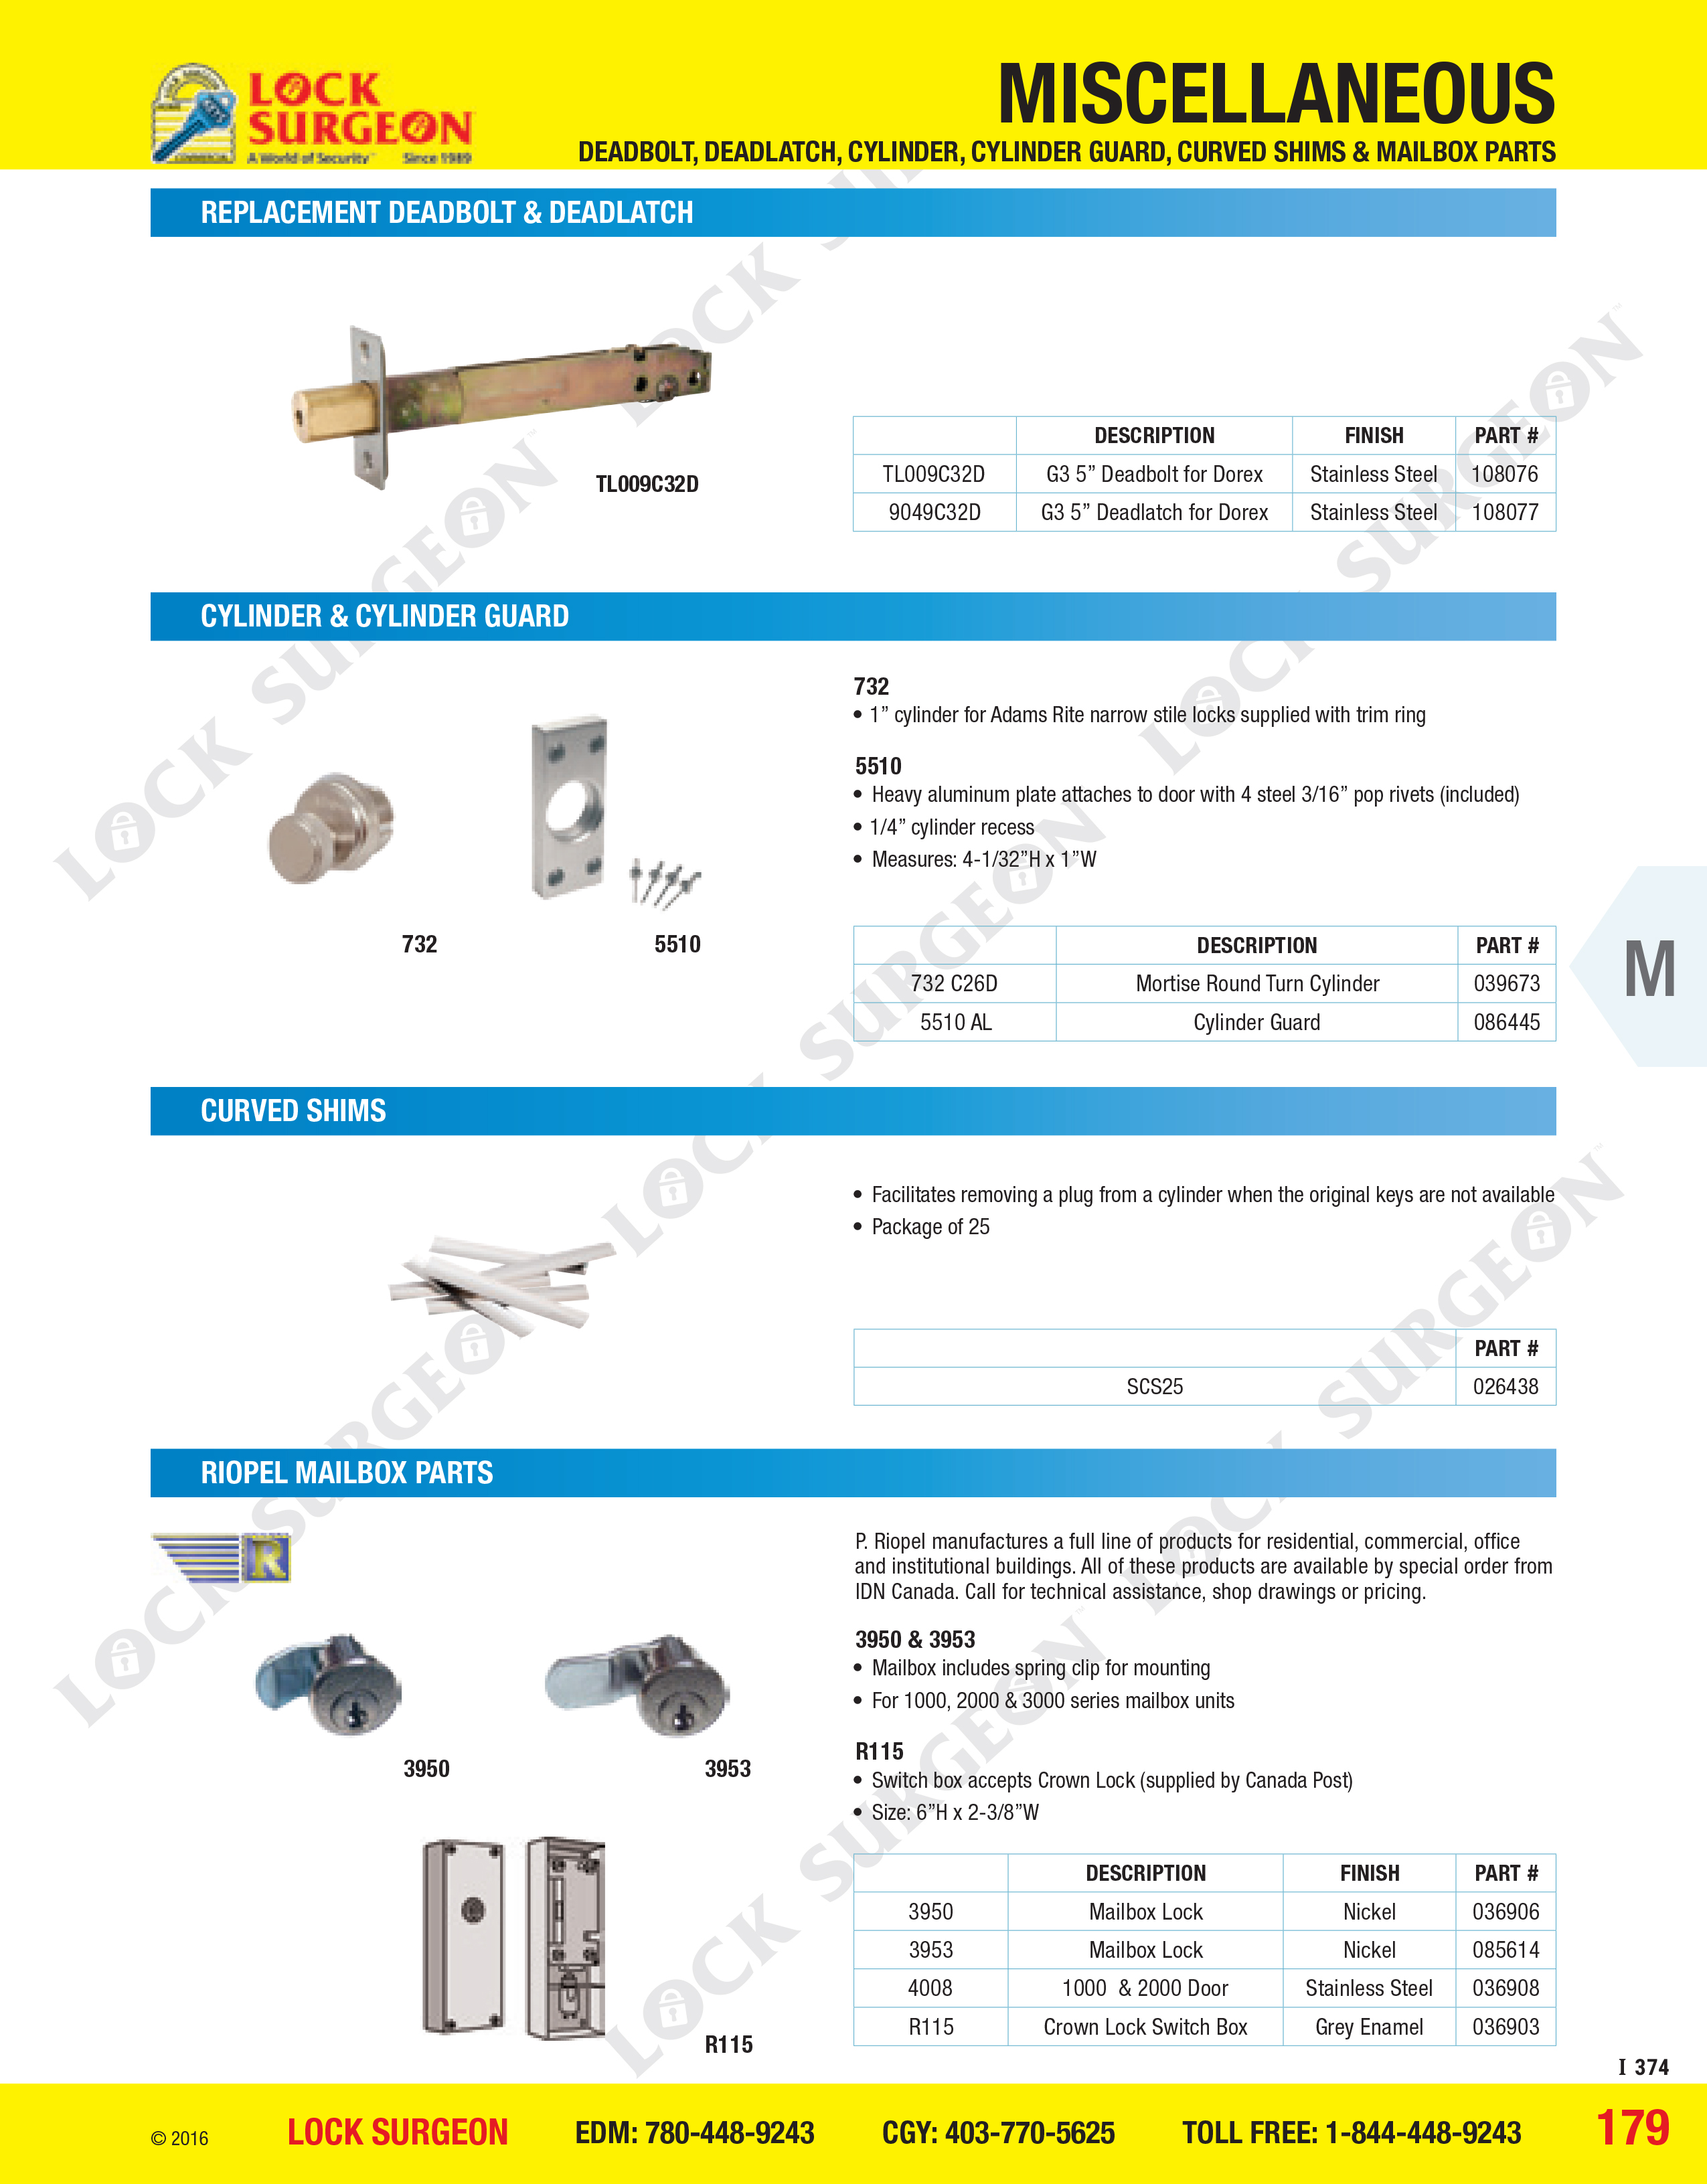 deadbolt deadlatch cylinder-guard curved shims and mailbox parts Acheson.